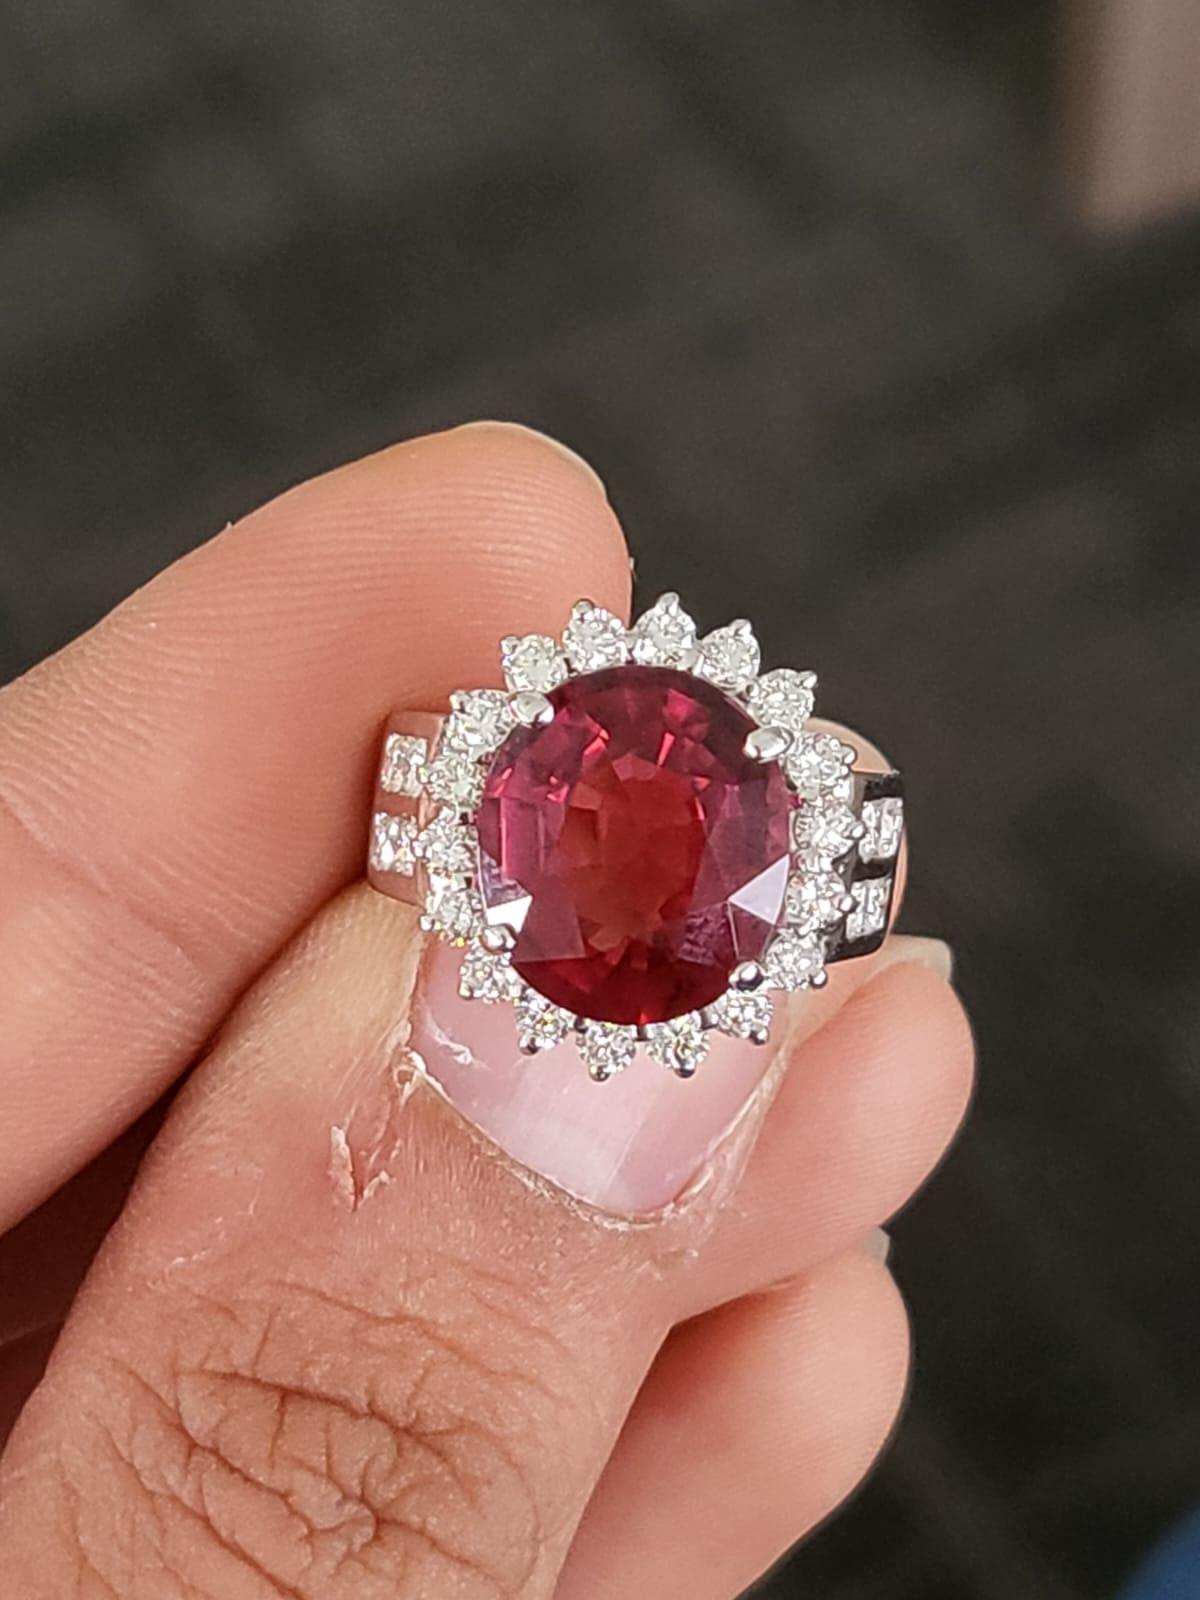 A very gorgeous and one of a kind, Rubellite Engagement Ring set in 18K White Gold & Diamonds. The weight of the Rubellite is 5.49 carats. The weight of the Diamonds is 0.40 carats. Net gold weight is 6.82 grams. The dimensions of the ring are 1.7cm